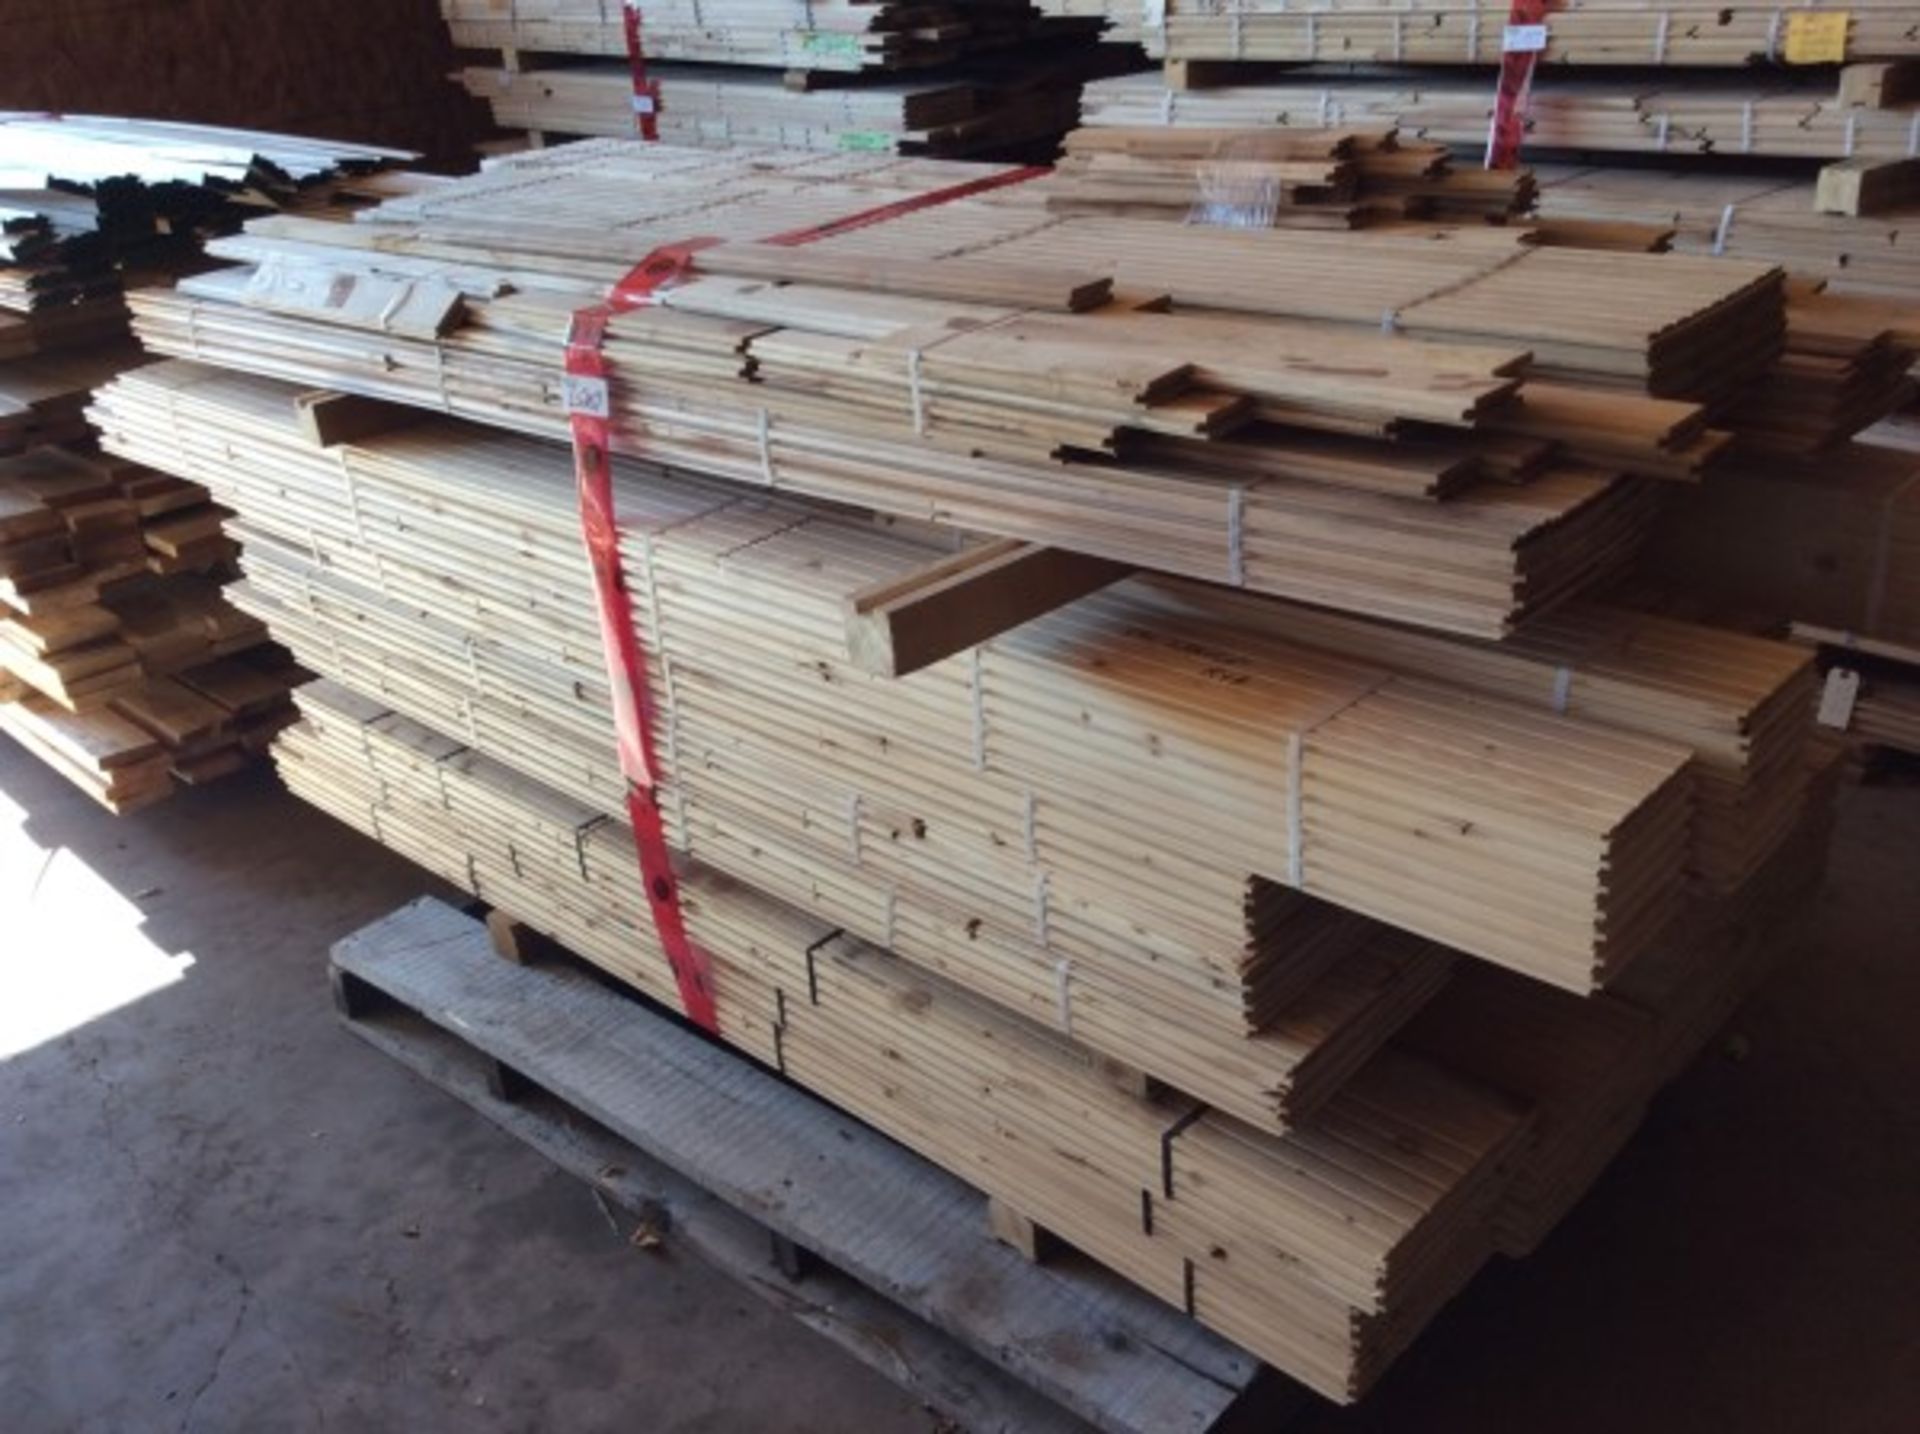 3 LIFTS OF SPRUCE AND HARDWOOD - 30 BUNDLES APPROX 600 SQFT - B